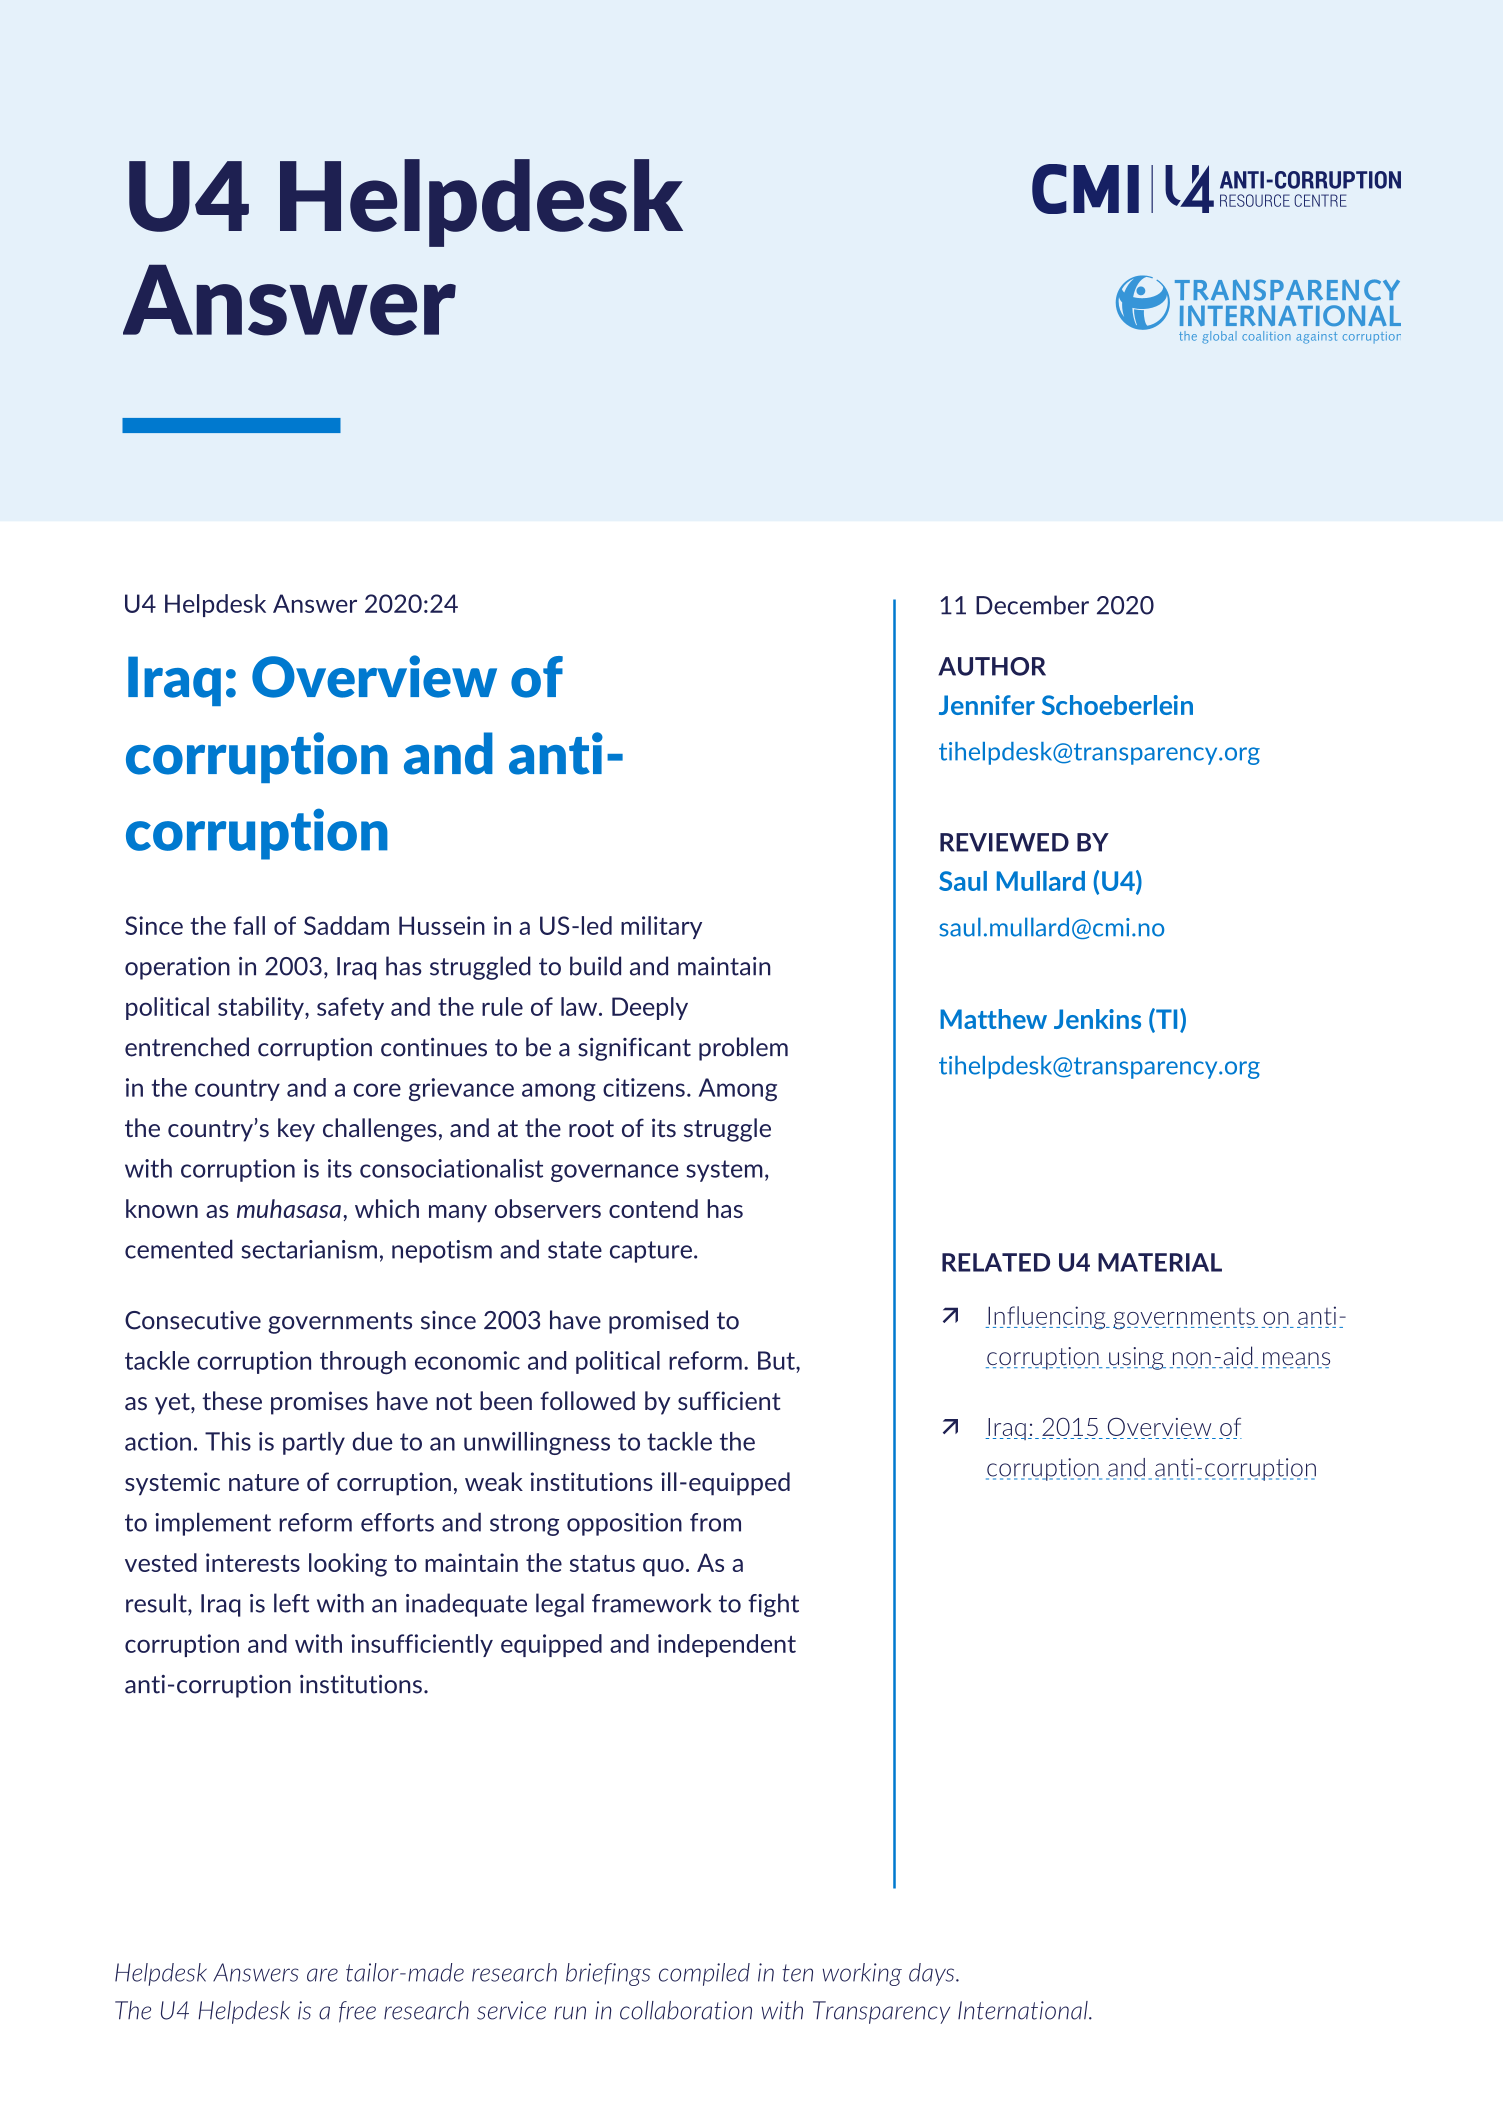 Iraq: Overview of corruption and anti-corruption